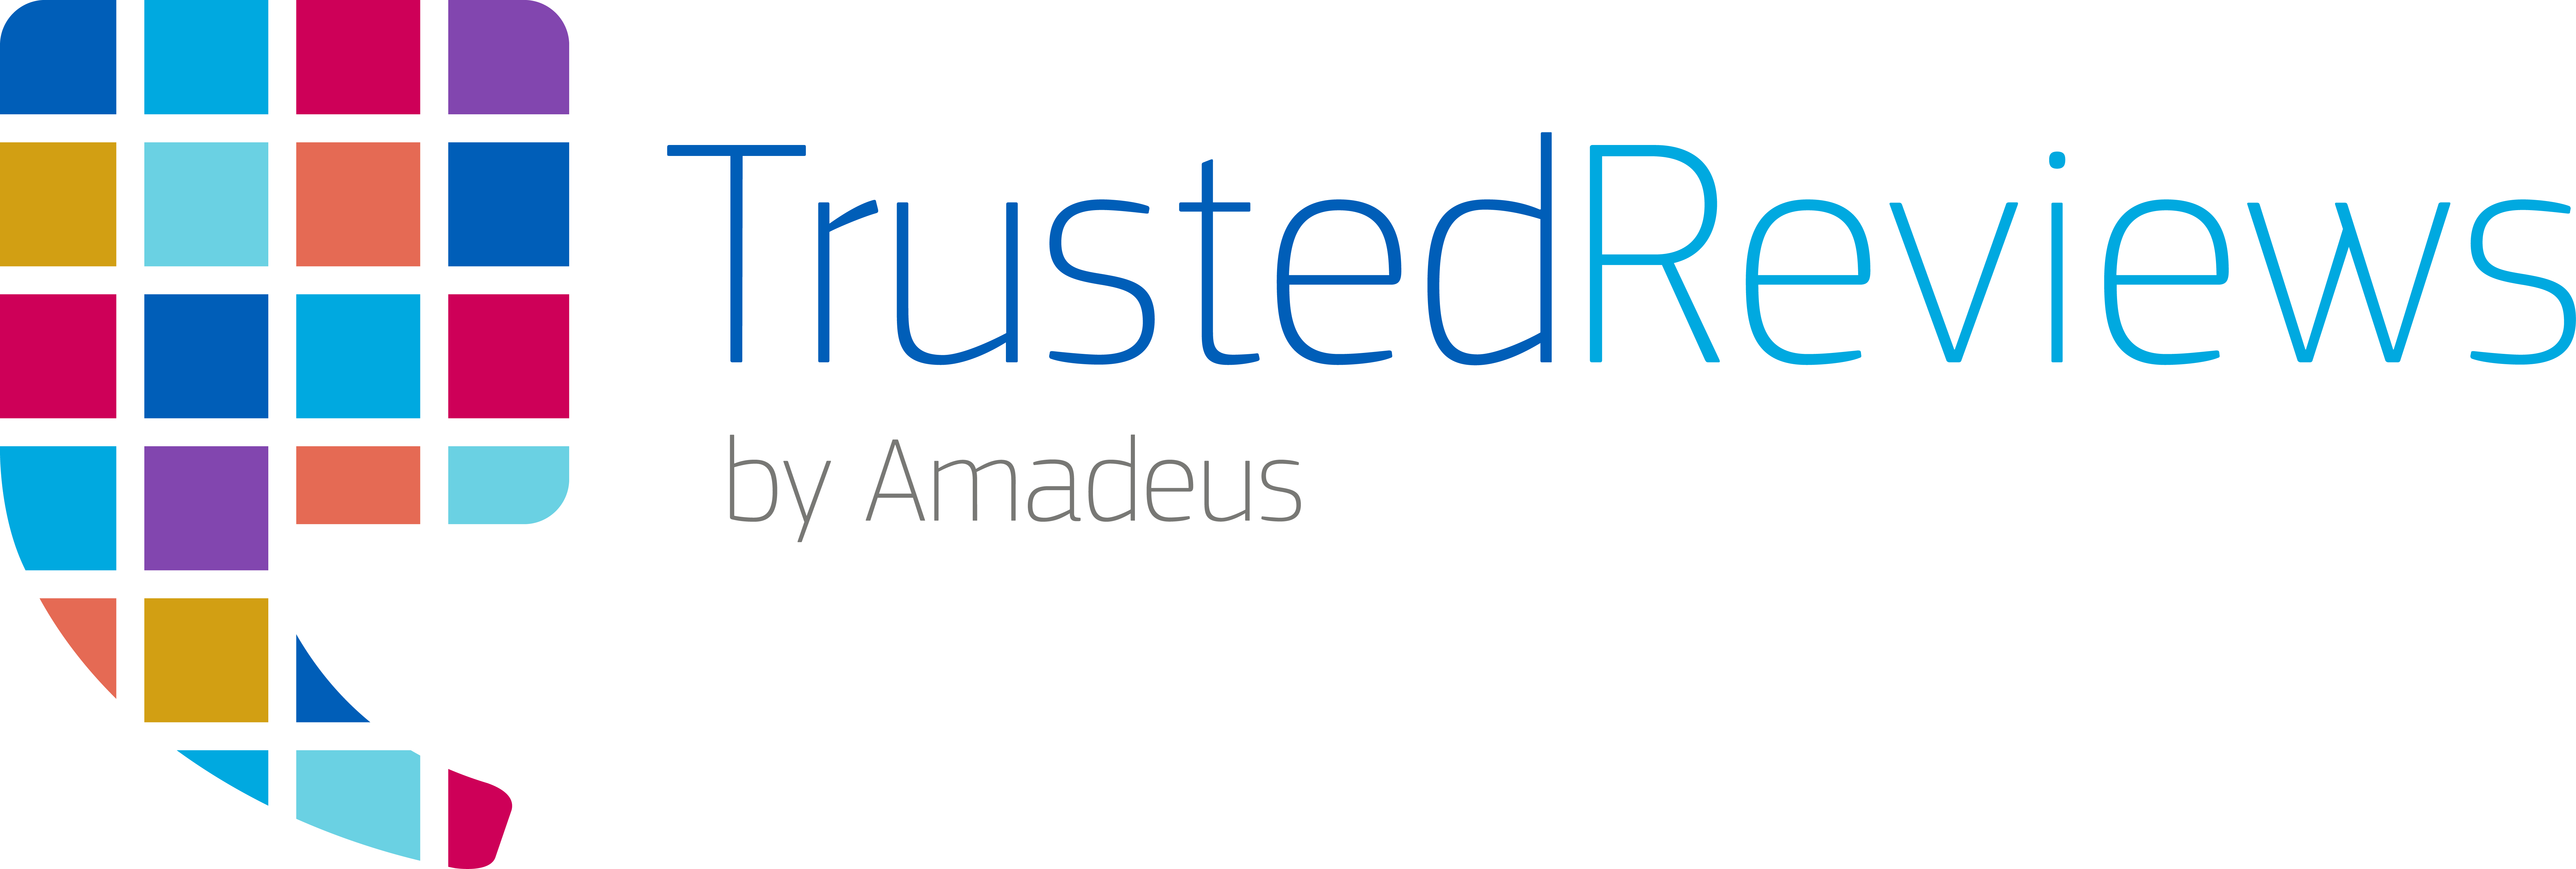 Trusted Reviews by Amadeus